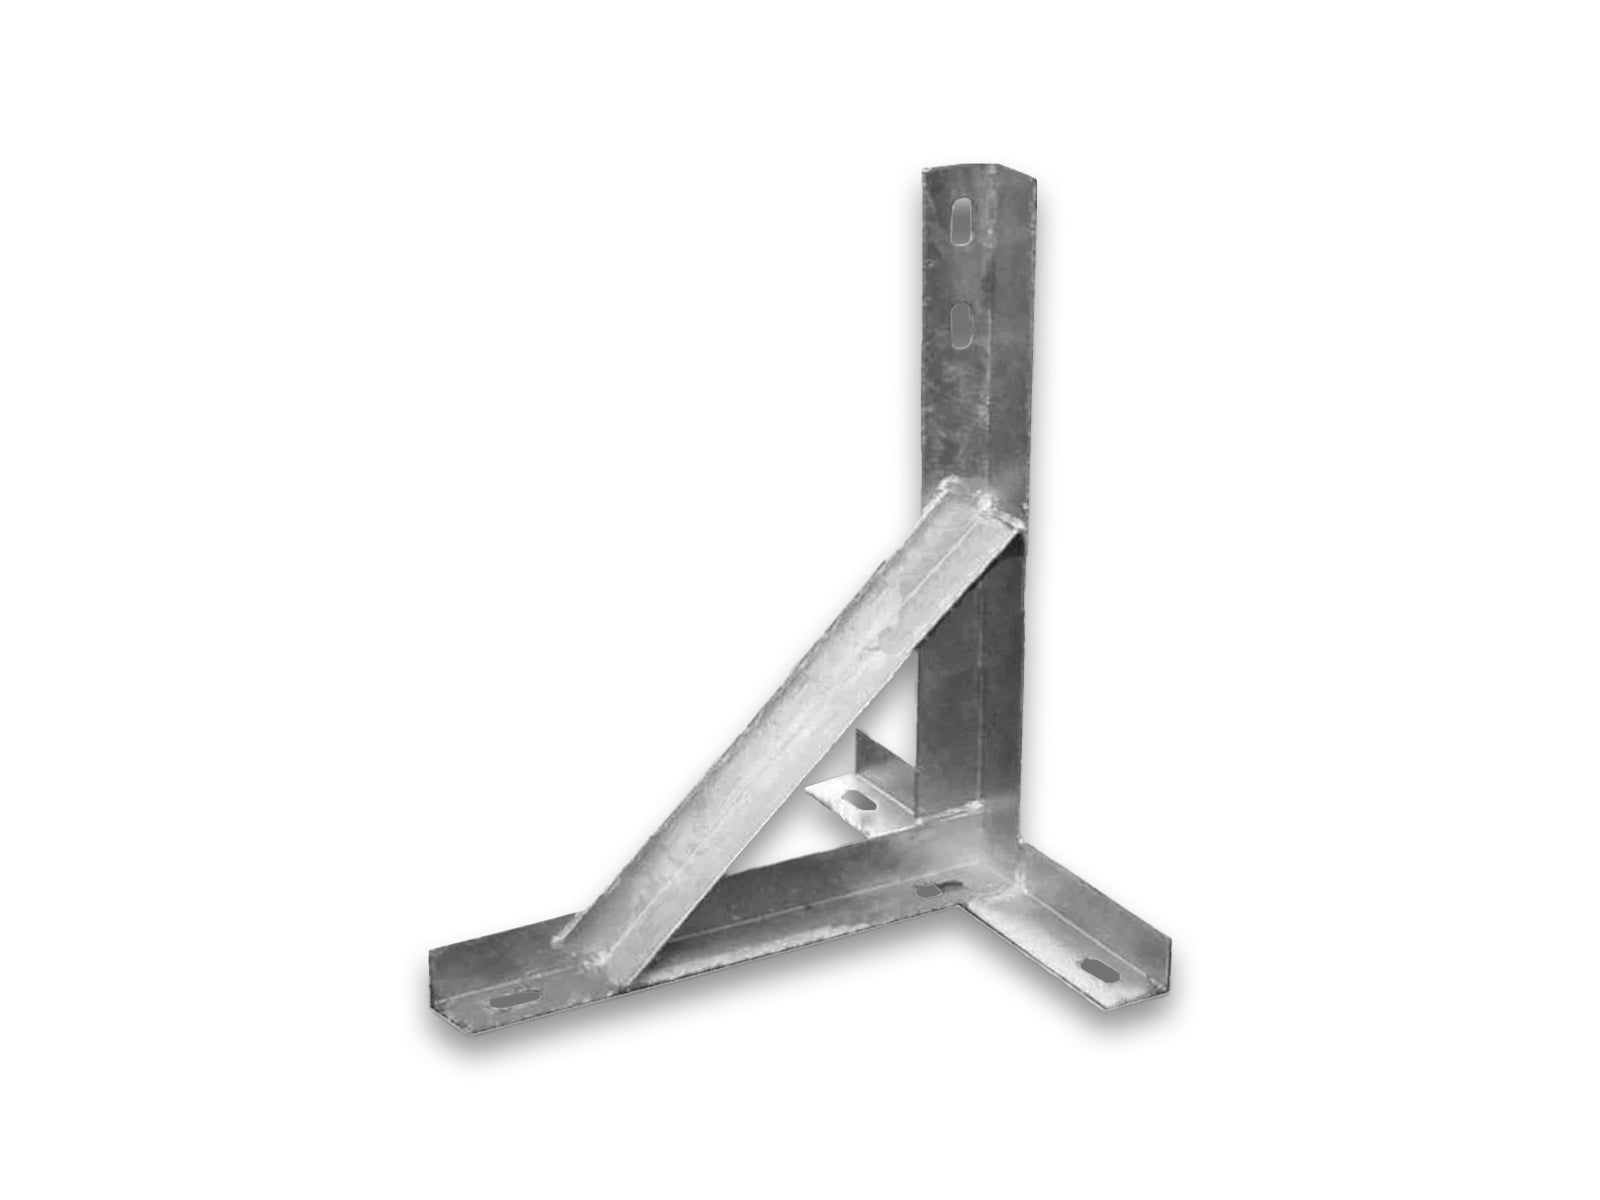 Left-side-view-image-of-the-Galvanised-K-Type-Wall-Bracket-on-the-white-background